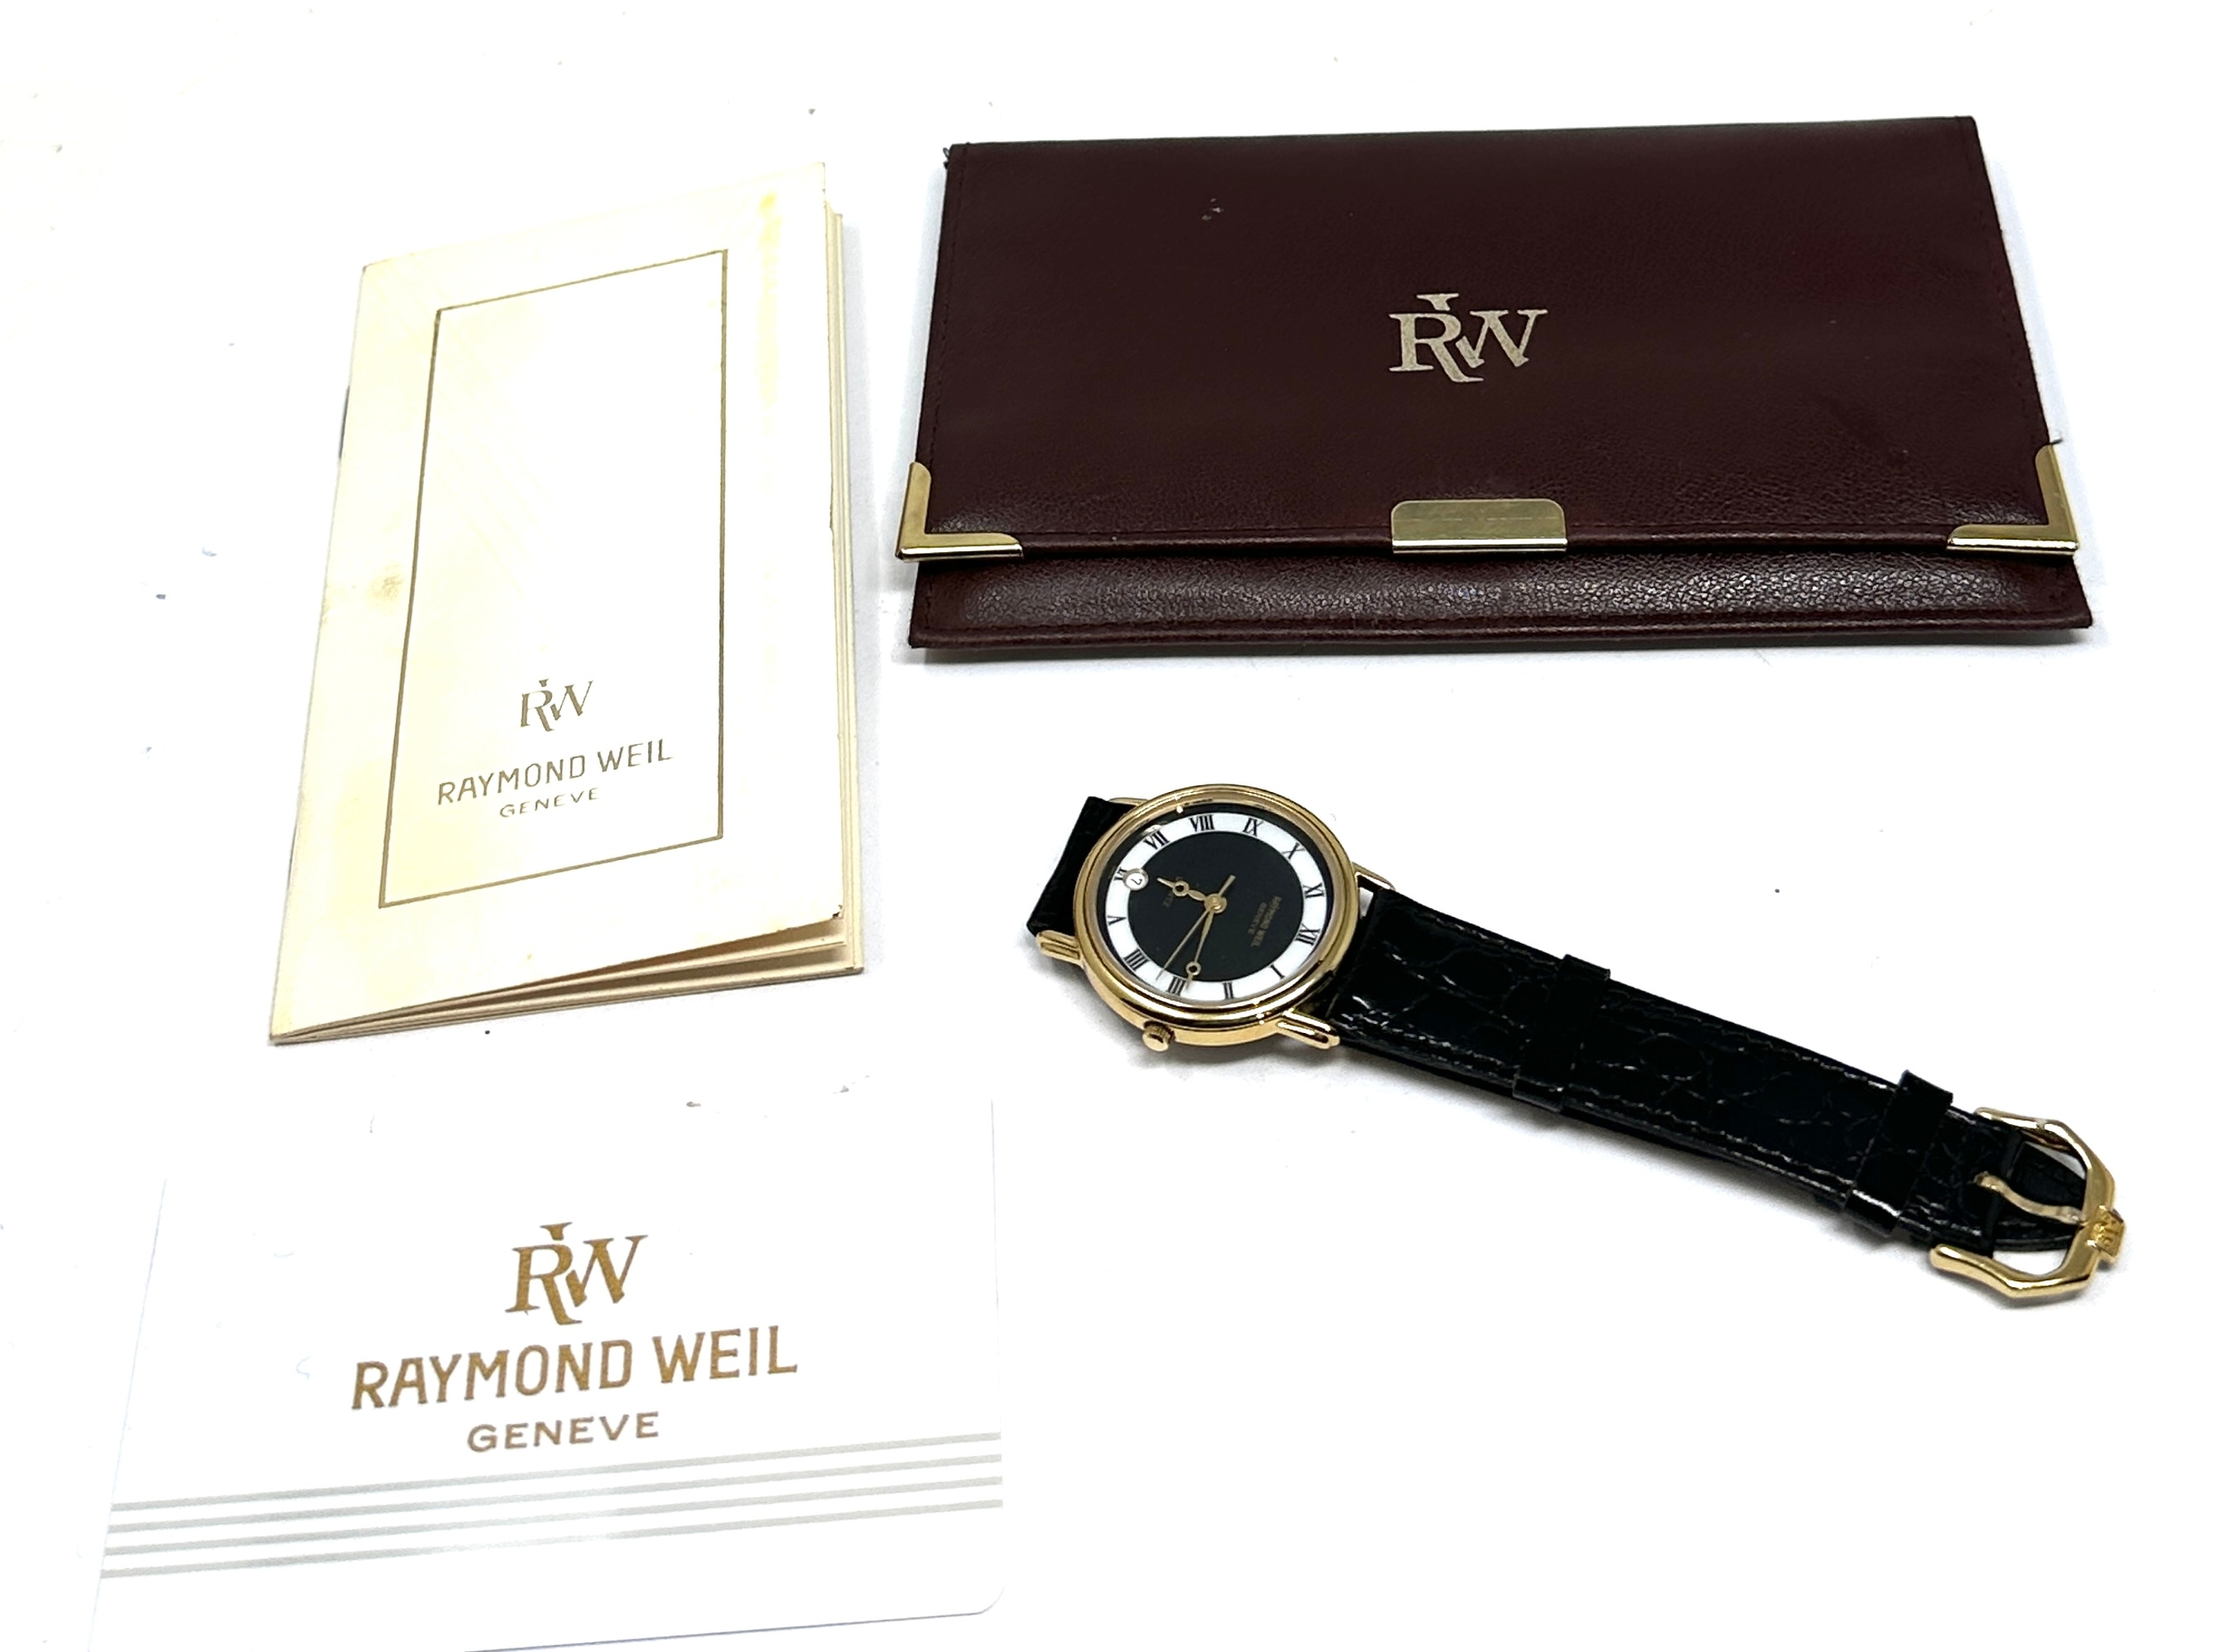 Gents raymond weil geneve wristwatch comes in wallet and booklet in working order